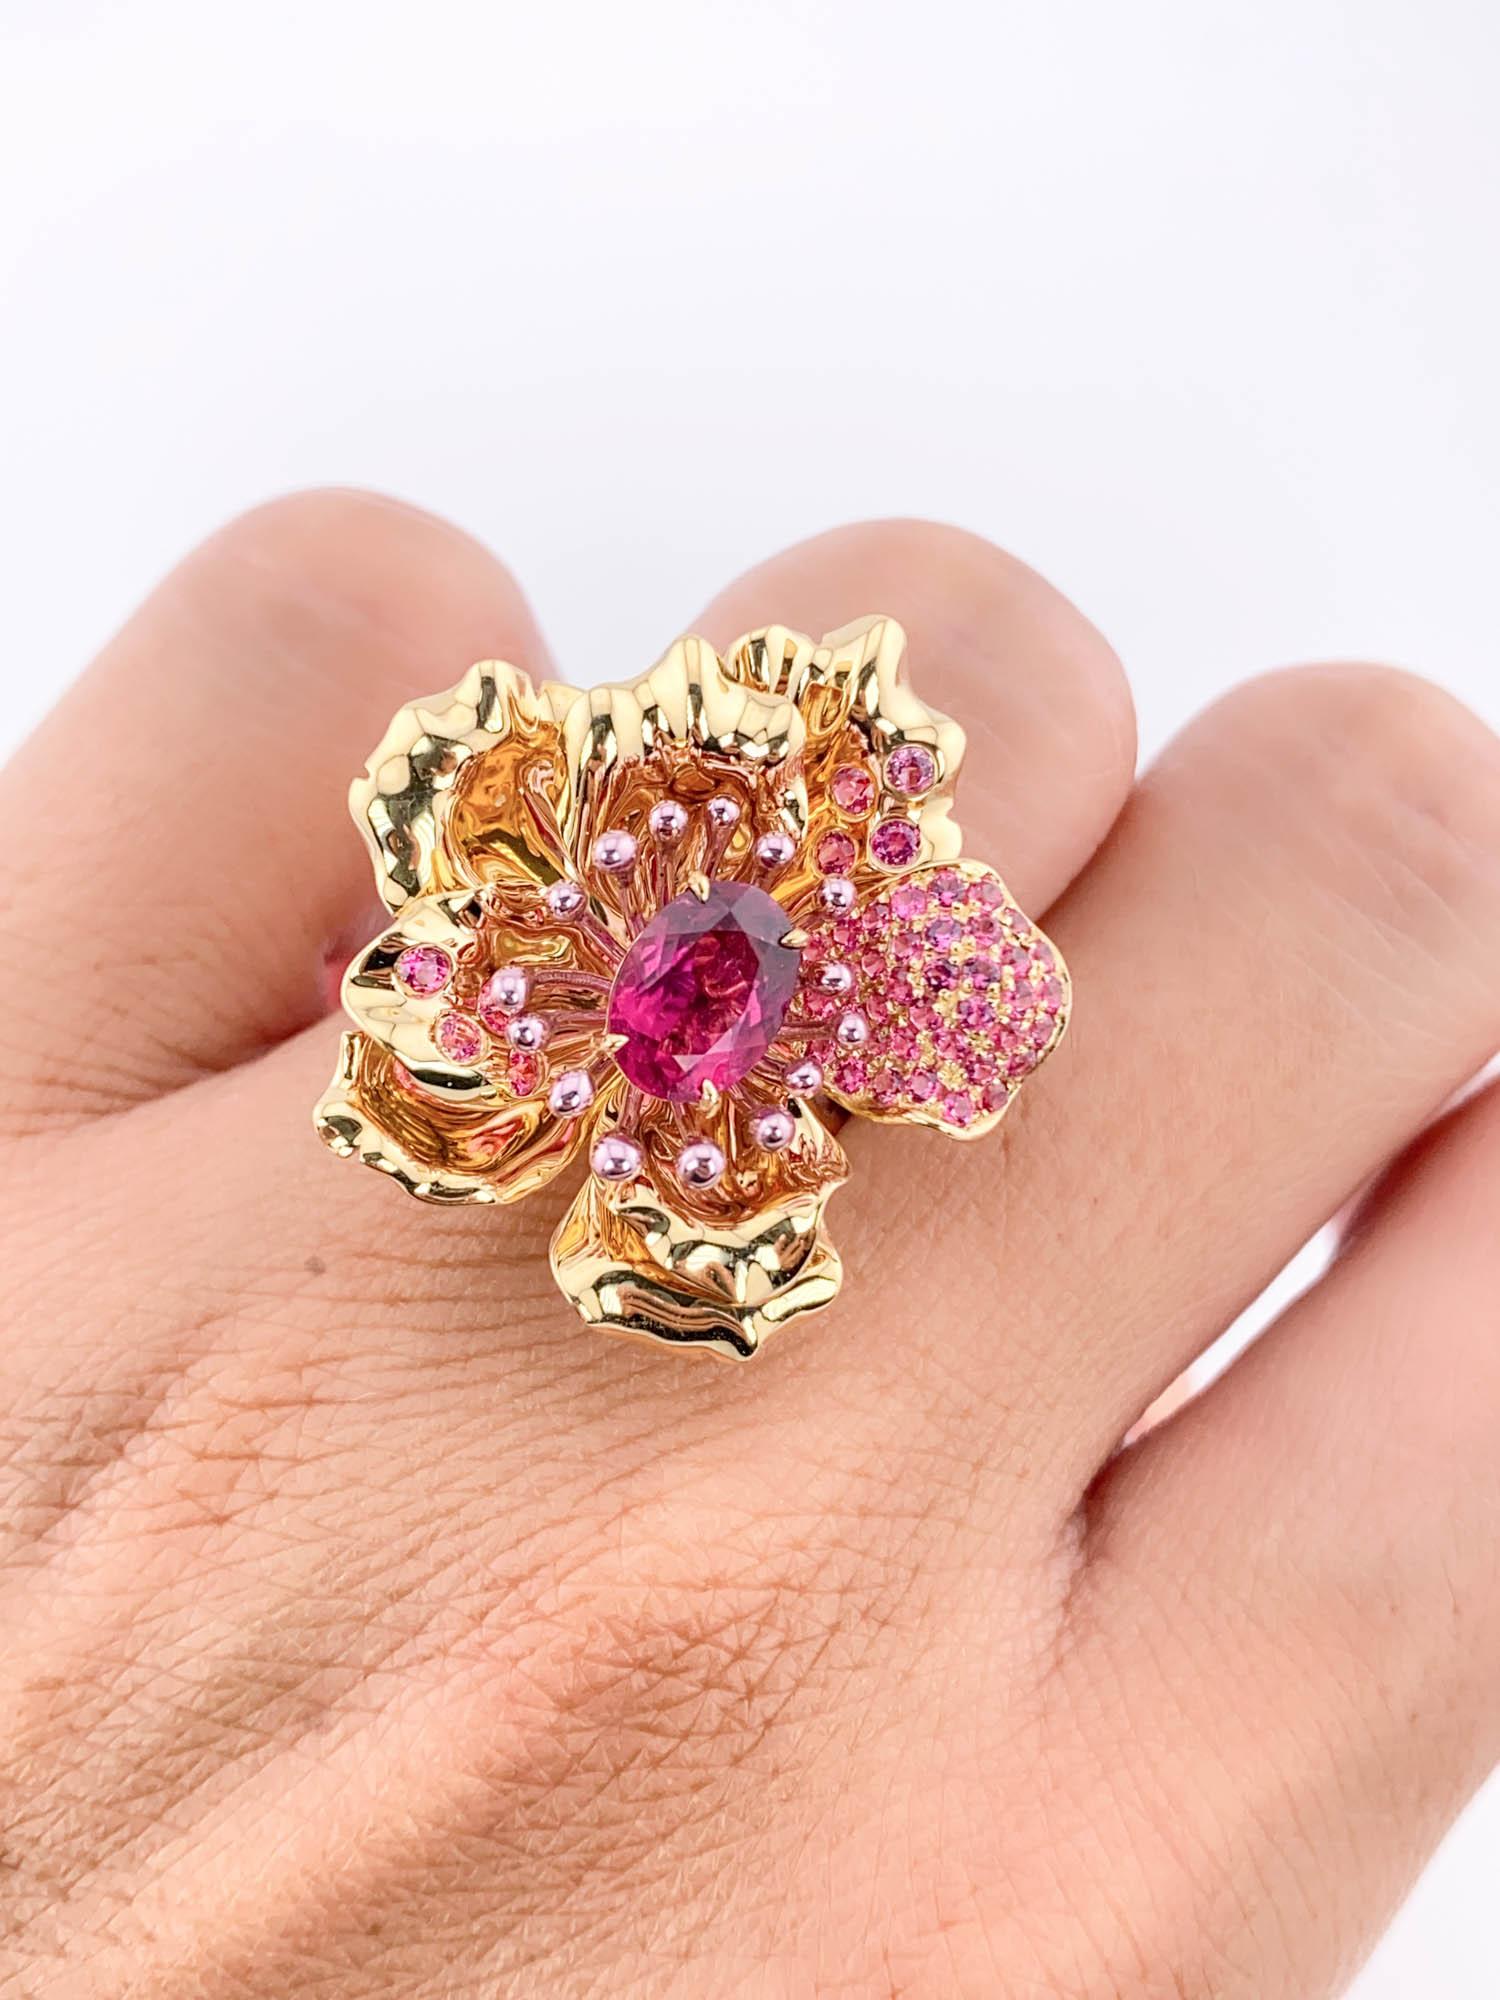 Distinctive and luxurious, this one-of-a-kind art jewelry from our Nature Collection will be the centerpiece of your ensemble. Boasting a masterfully crafted flower design draped in a 18K gold floral setting studded with hot pink spinels, the ring